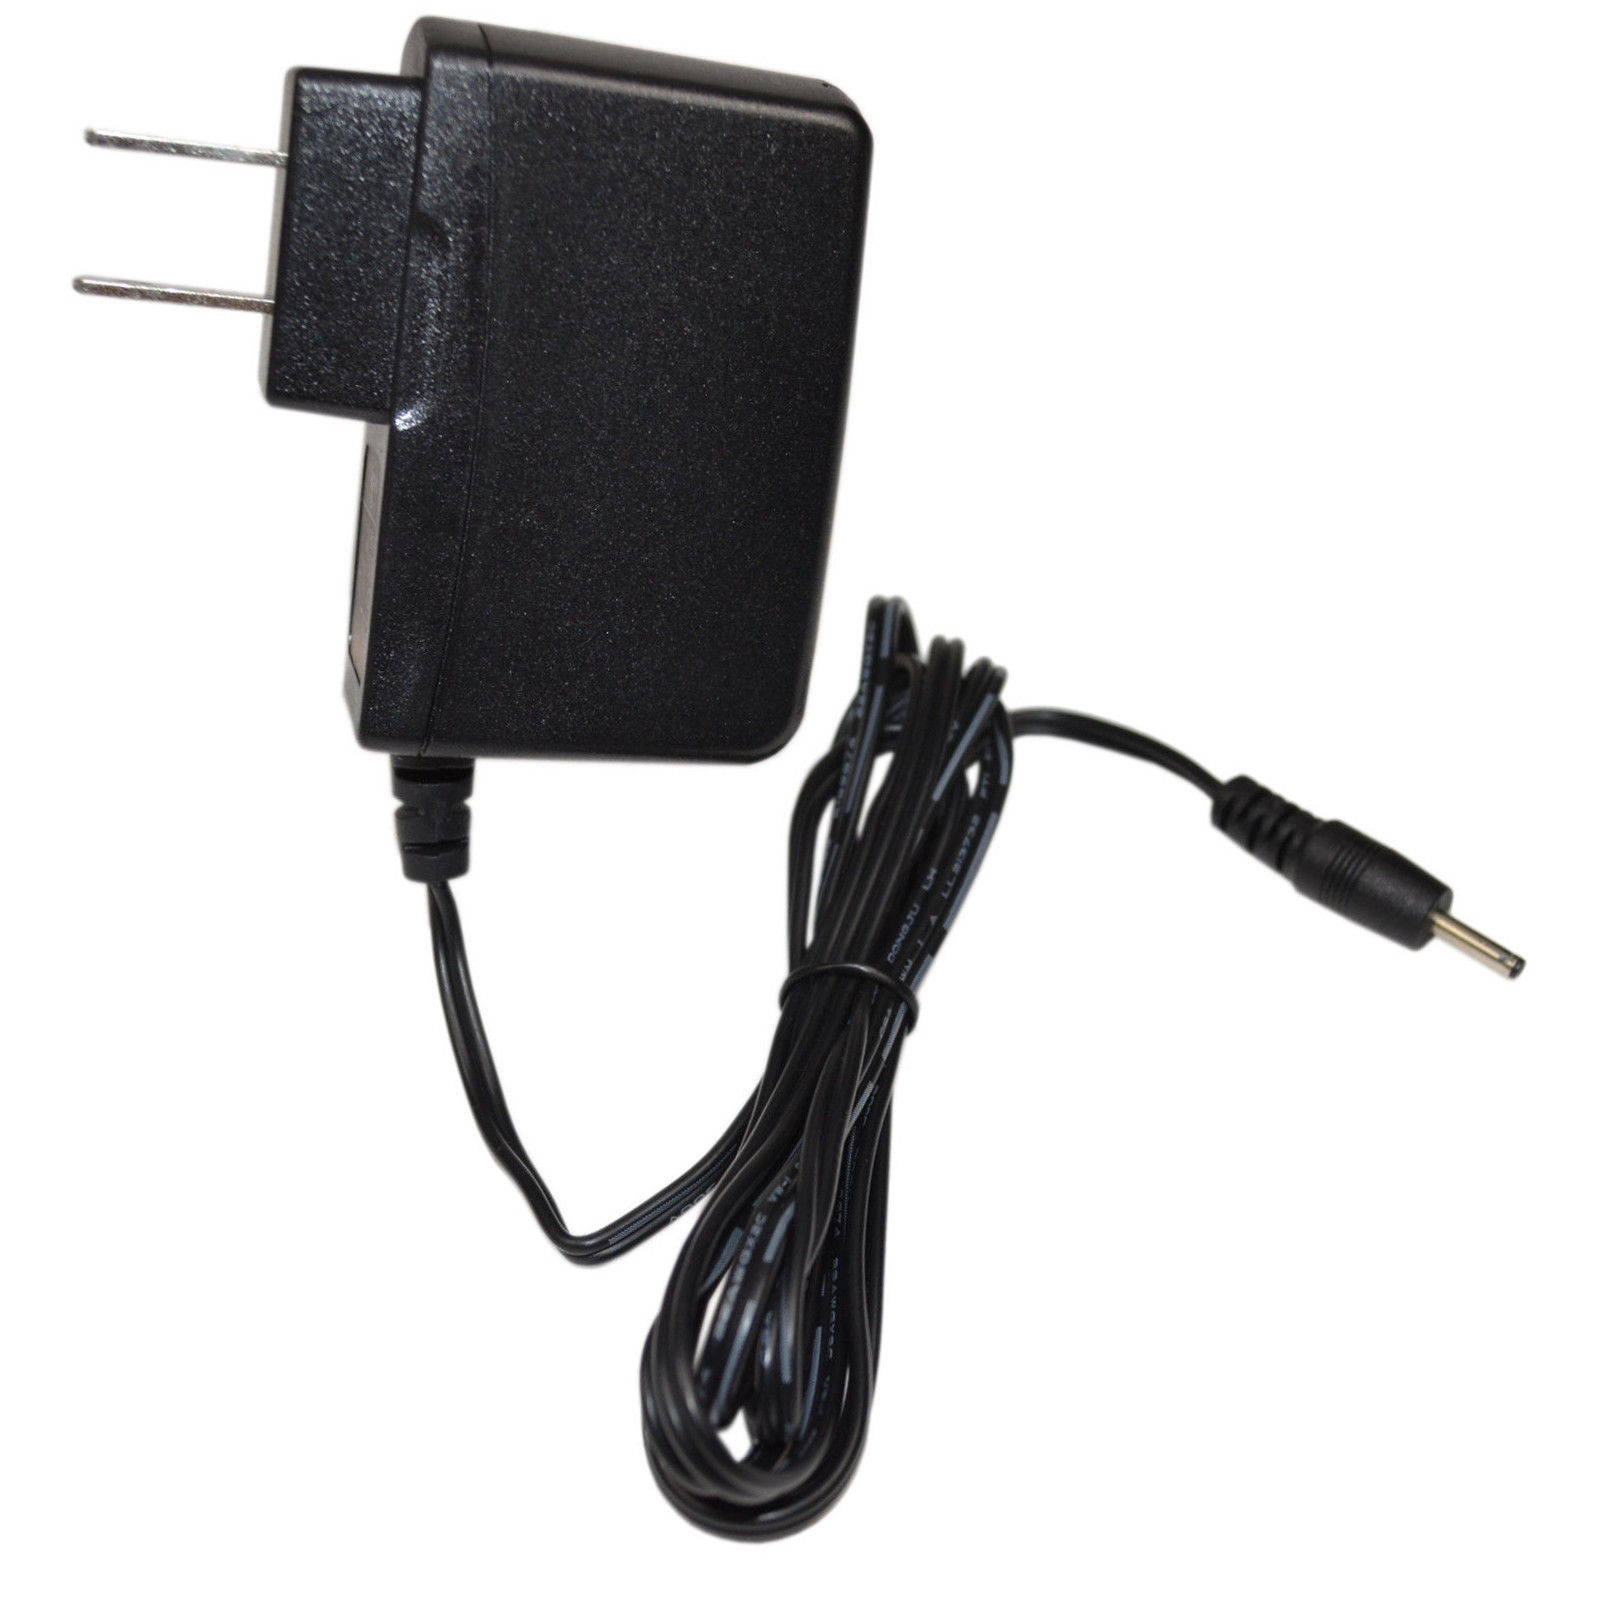 HQRP AC Adapter Charger for PSU-TAB7012 Tablo Android Tablet PC, Power Supply Cord